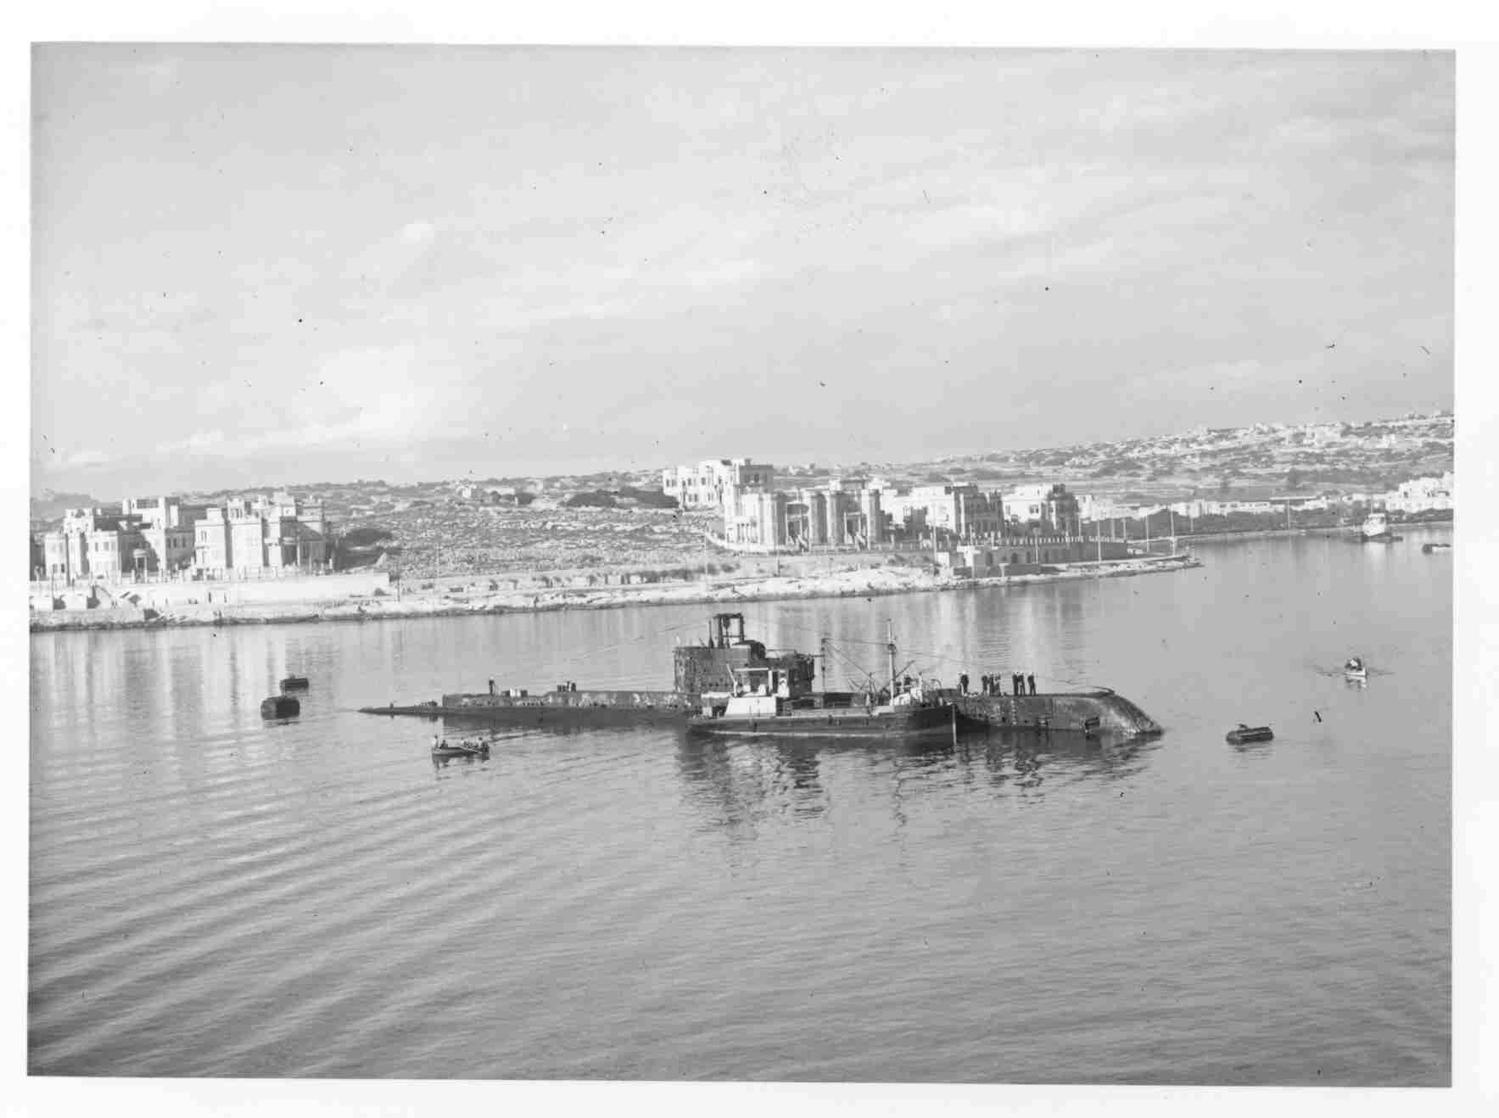 HMSM OLYMPUS taking in supplies in Manoel Creek, Grand Harbour, Malta.  A 6928. Imperial War Museums. Part of the Admiralty Official Collection.